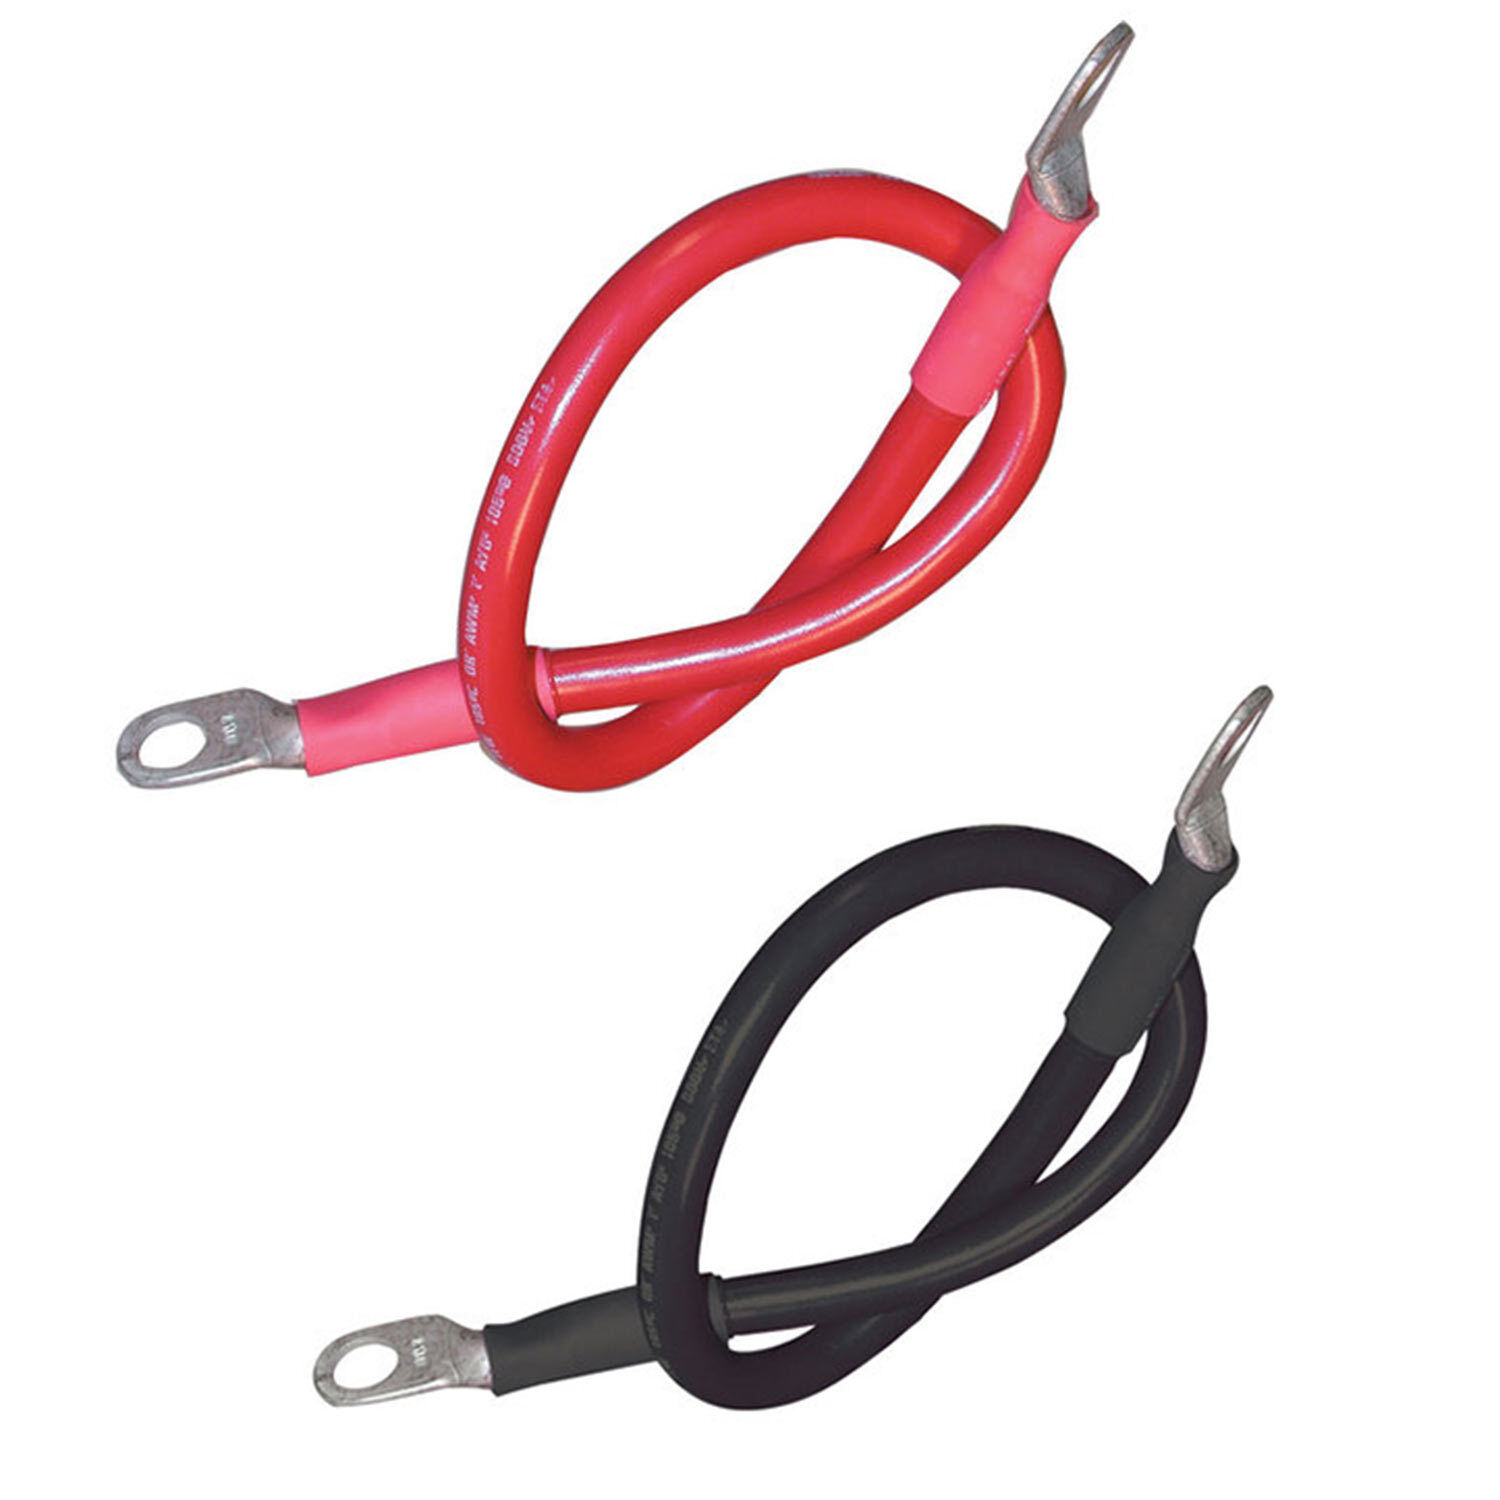 BATTERY CABLE LEAD BOAT MARINECONNECT 2 BATTERIESPOSITIVE EARTHBB2 